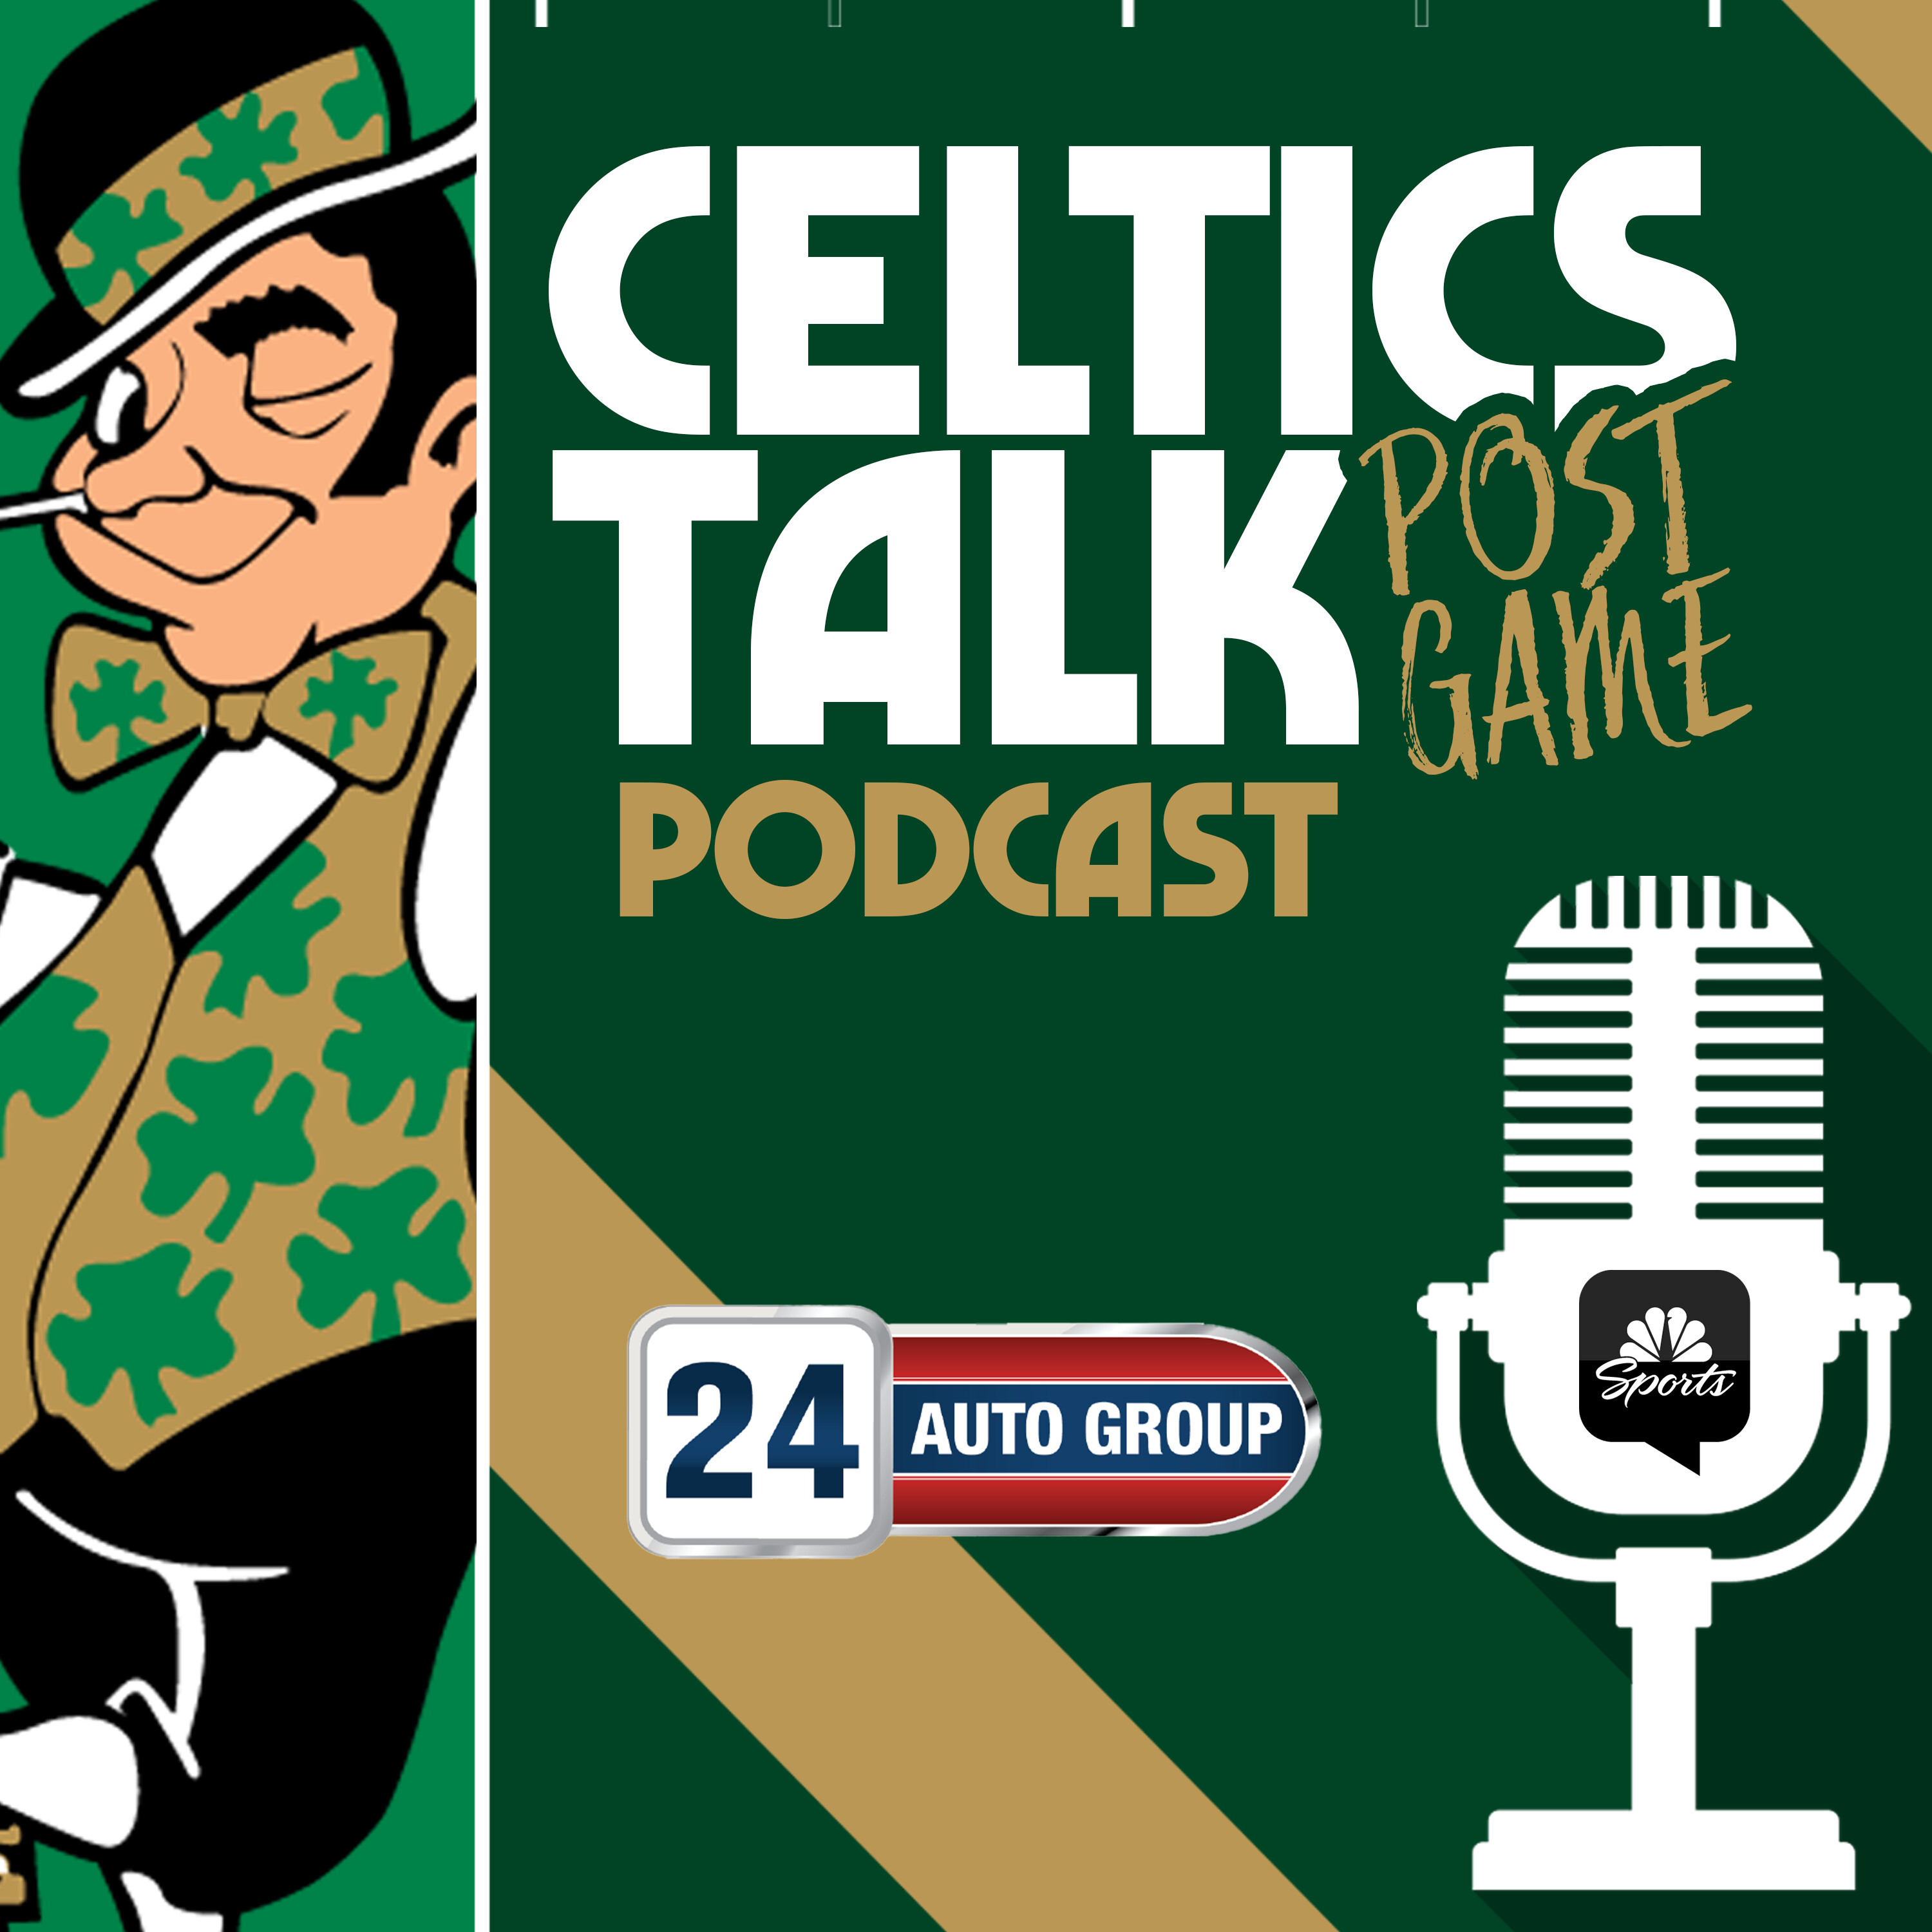 POSTGAME POD: Celtics eliminated from In-Season Tournament in quarterfinals with loss to Pacers